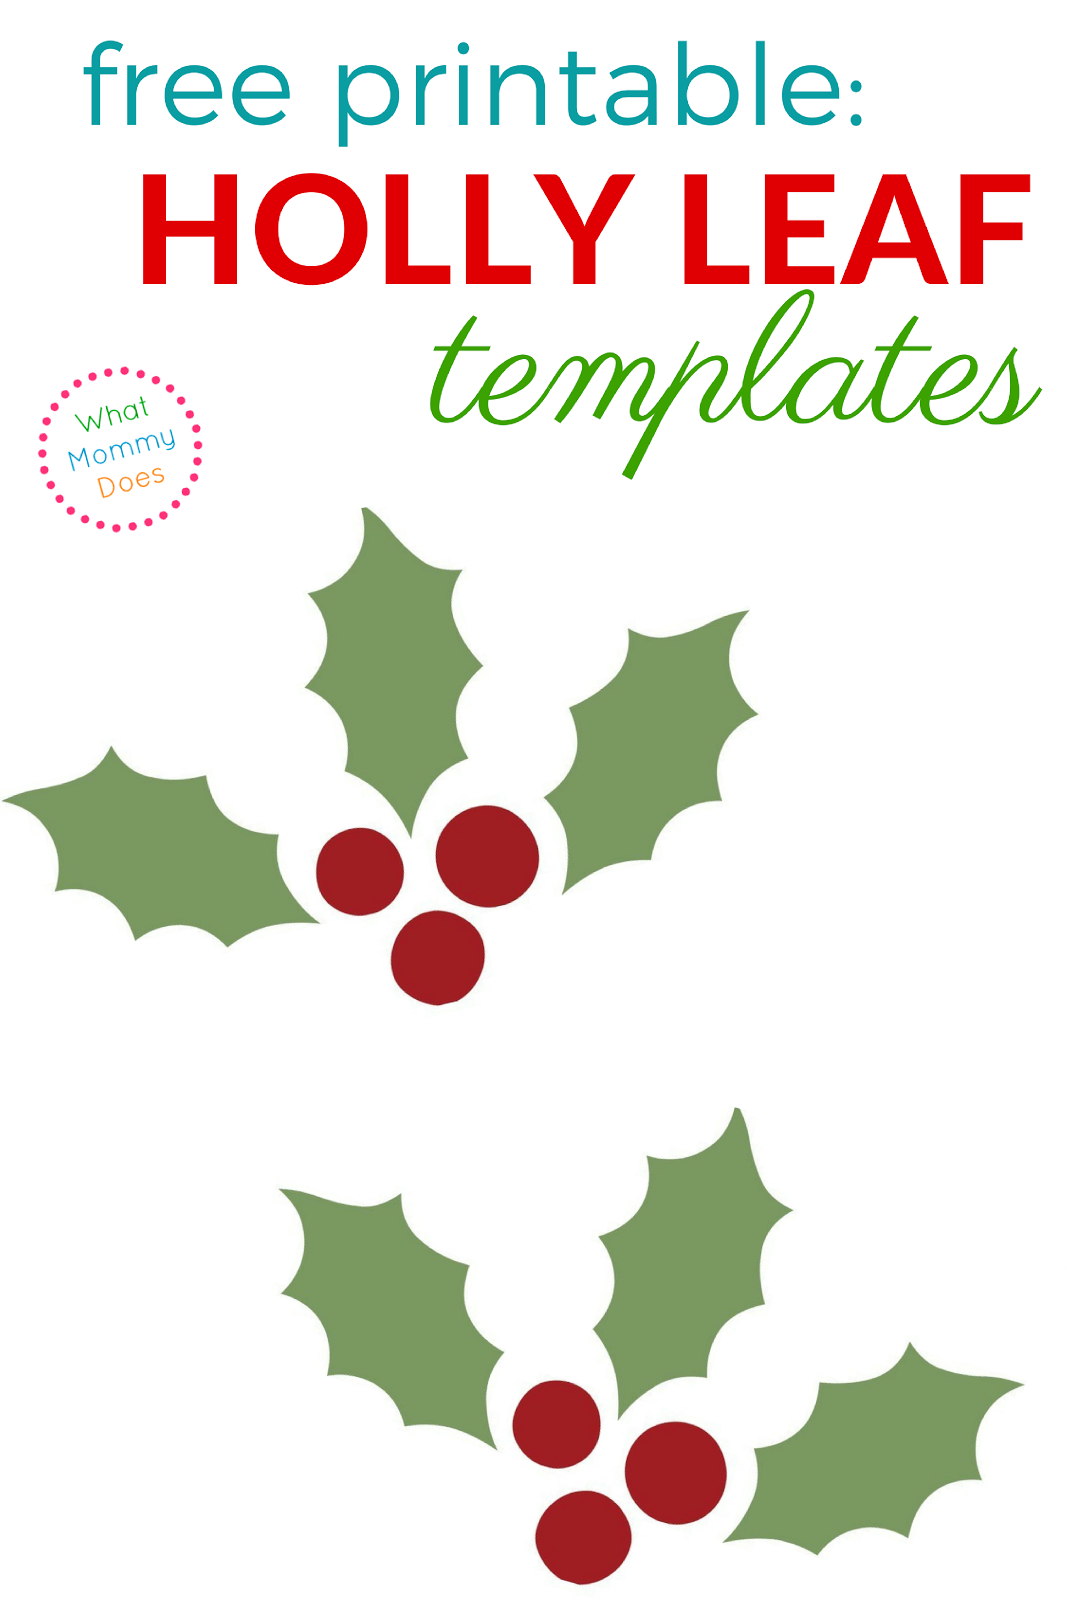 holly-leaf-templates-free-printable-patterns-to-cut-out-what-mommy-does